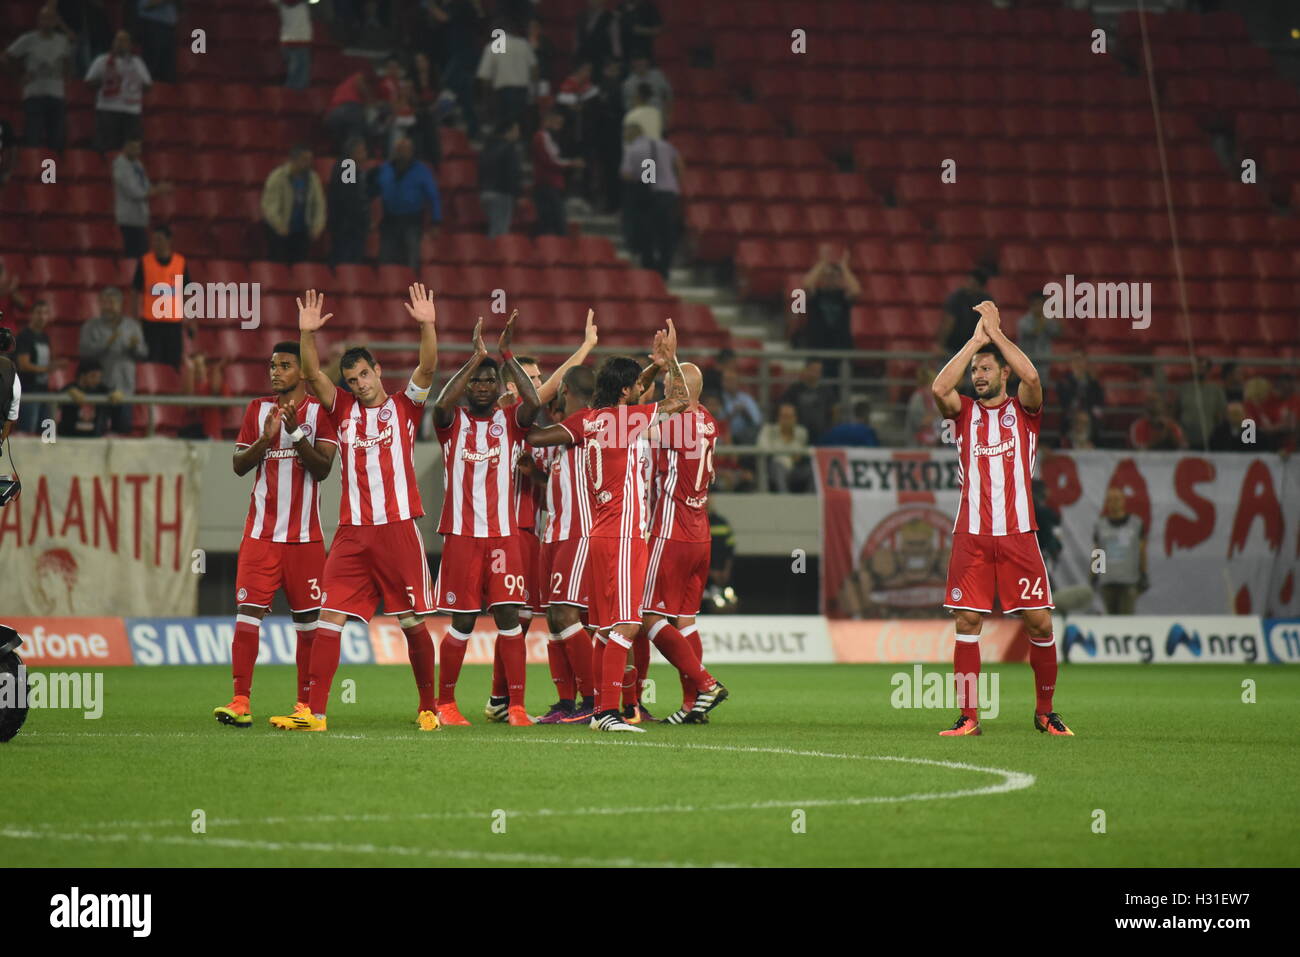 Athens, Greece. 02nd Oct, 2016. Players of Olympiacos applaud their fans at  the end of the match. Triumph for Olympiacos (red) football team, who  manage to win AEK (yellow-black) football team 3-0